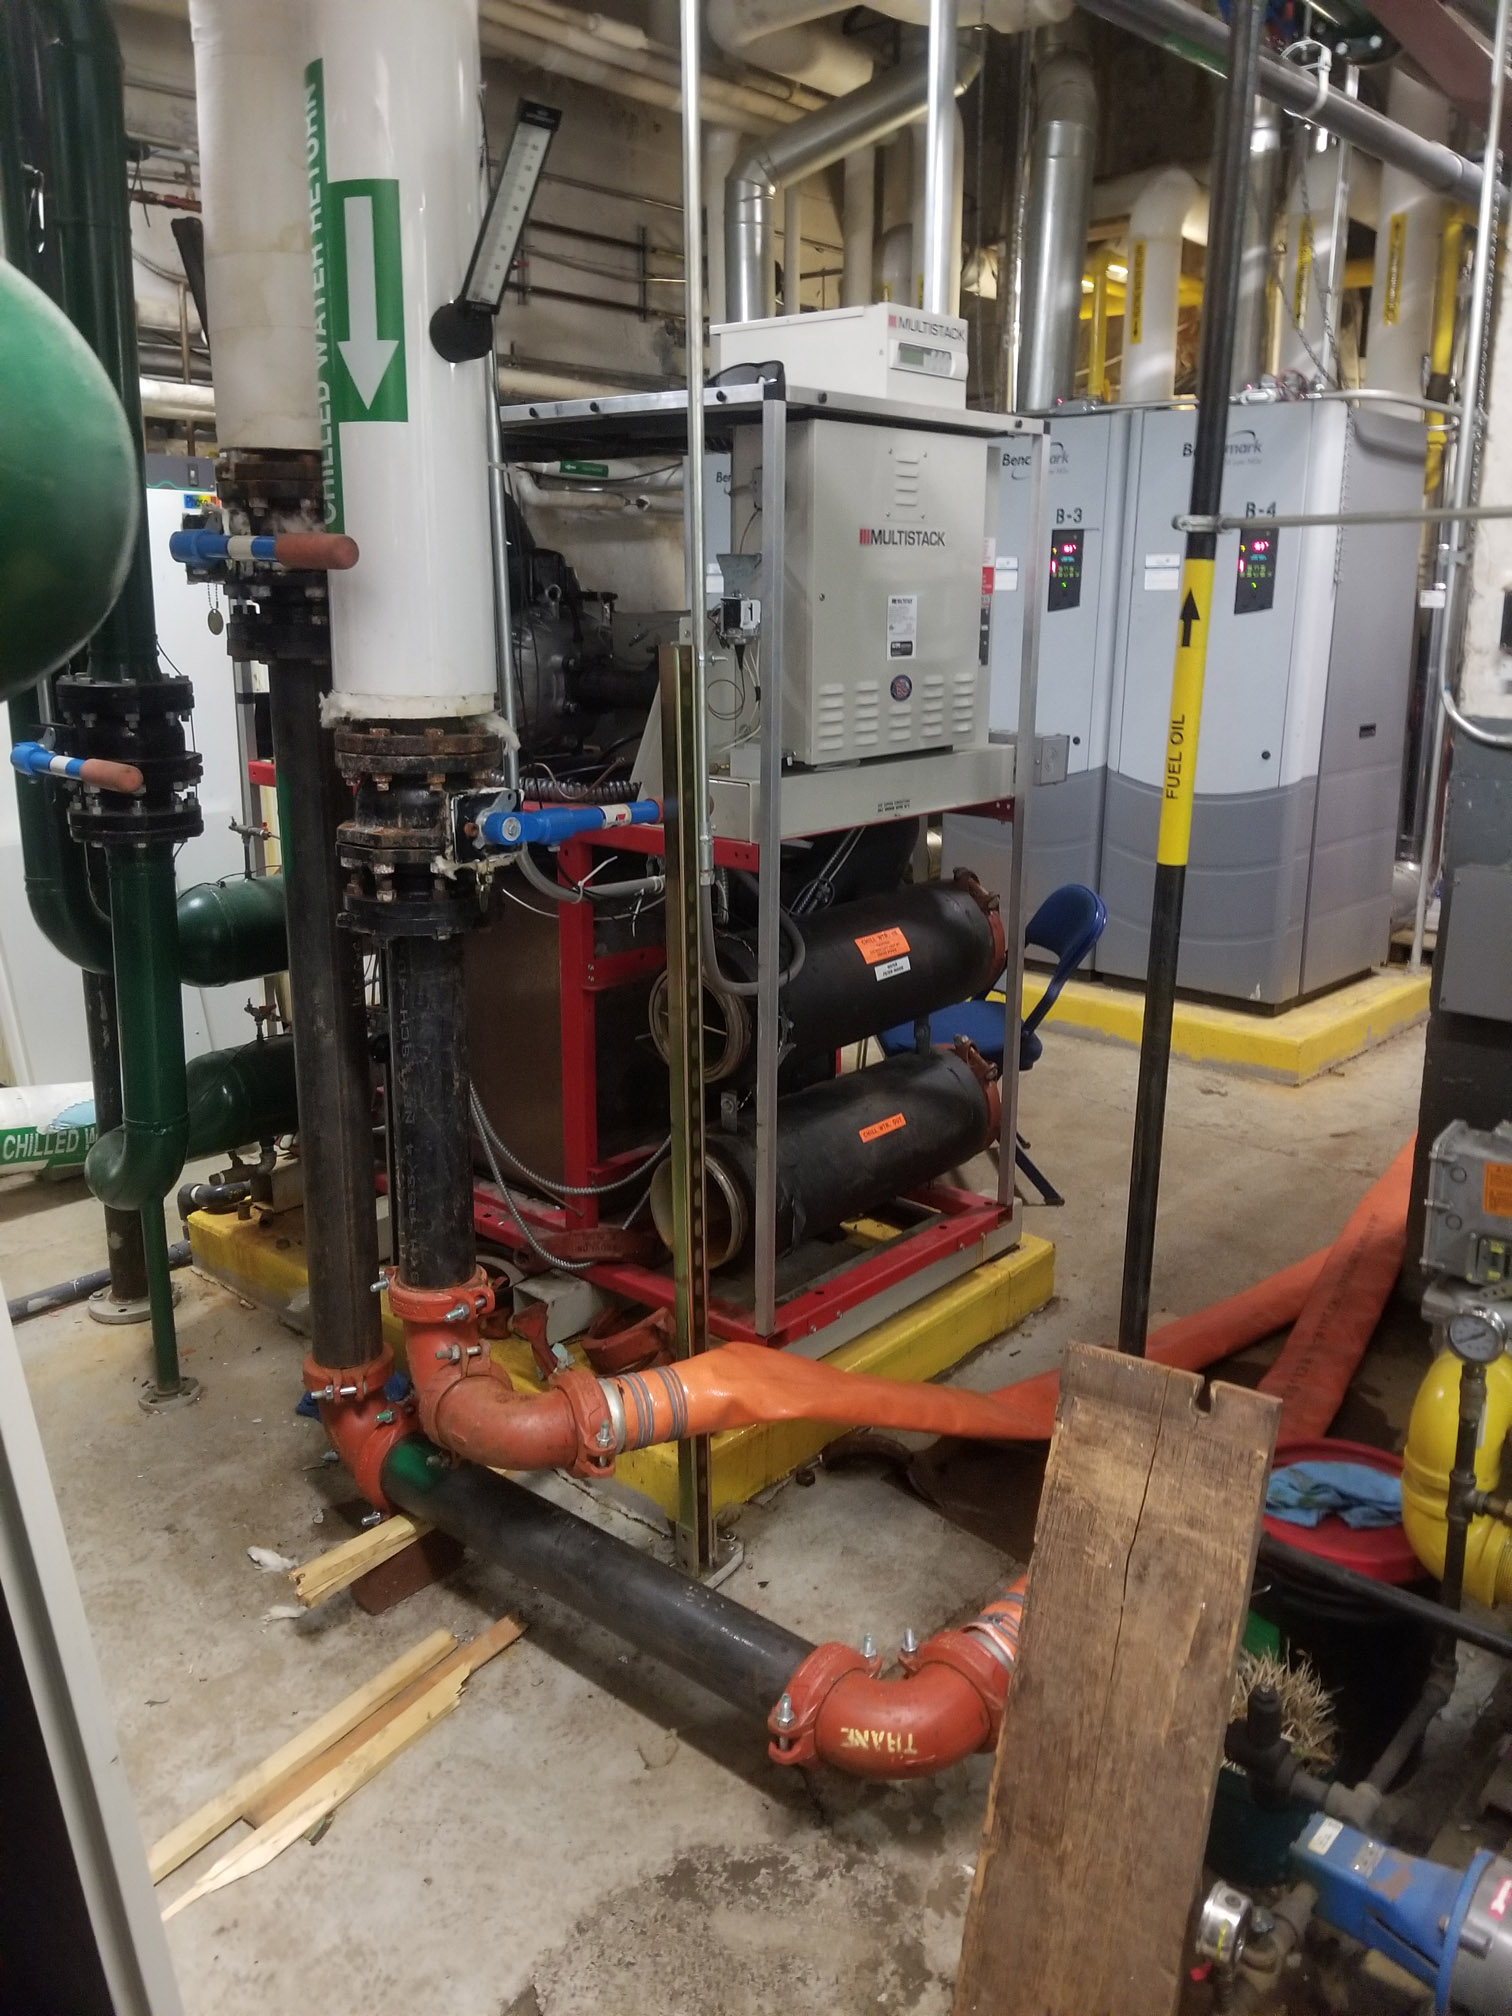 Air Cooled Chiller Rental Dixie County FL, Chiller AC Rental Dixie County FL, Temporary Chiller Dixie County FL, Rental Chiller Installation Dixie County FL